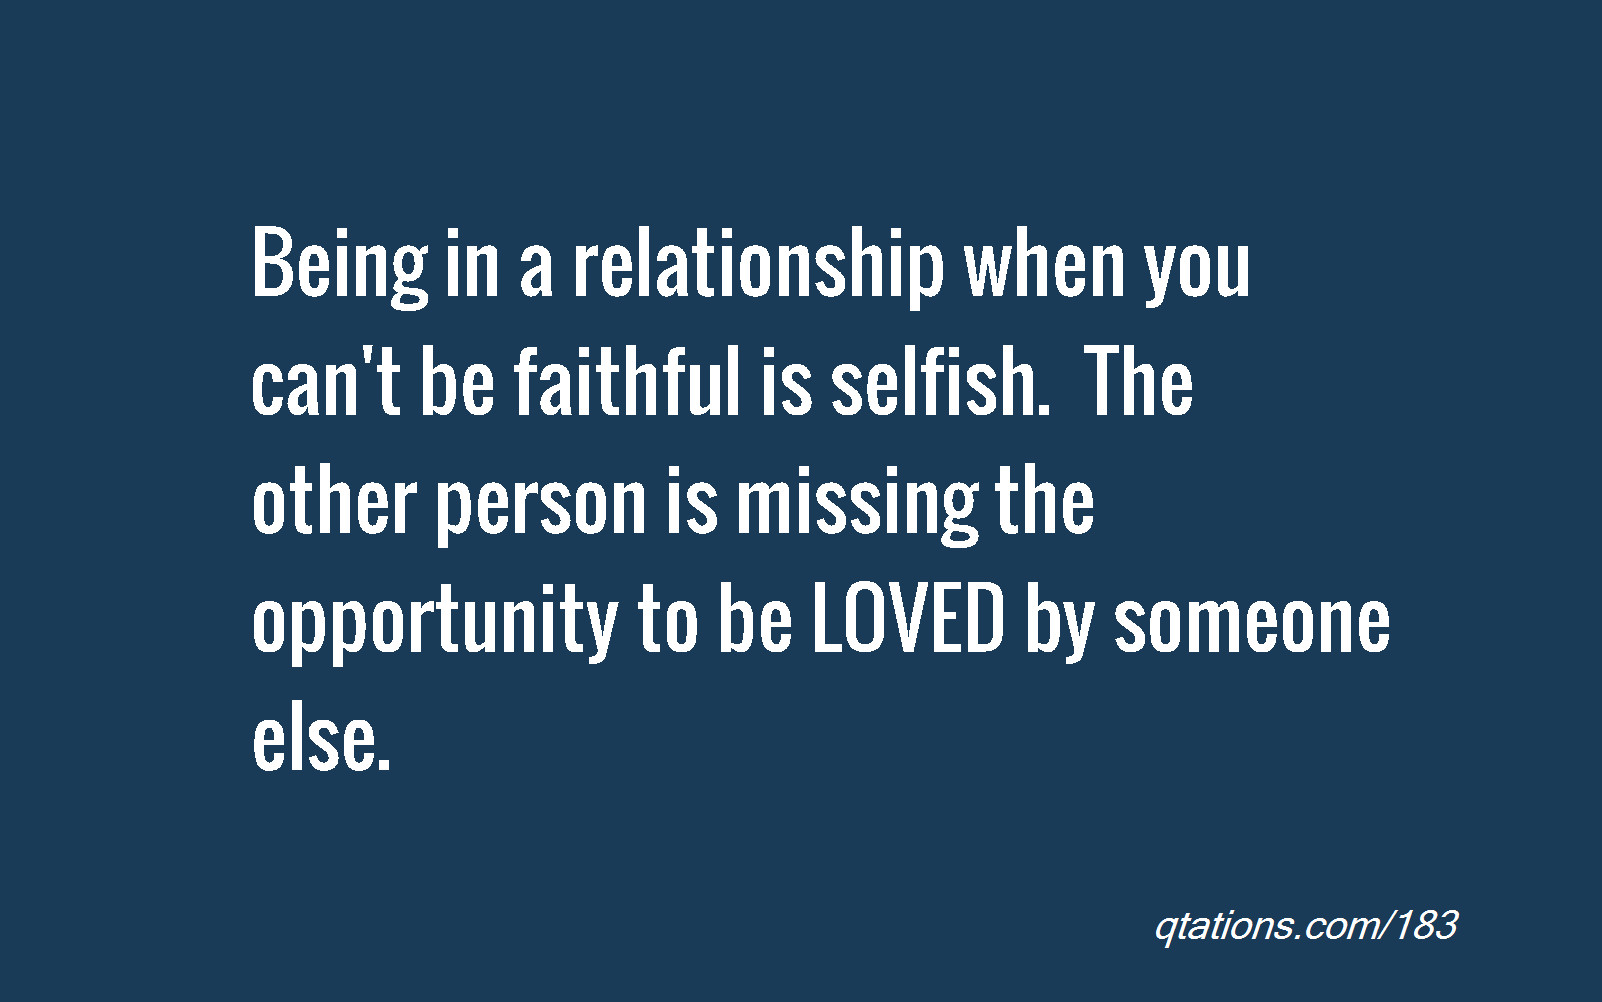 Quotes About Being Loyal In A Relationship
 Quotes About Faithful Relationships QuotesGram